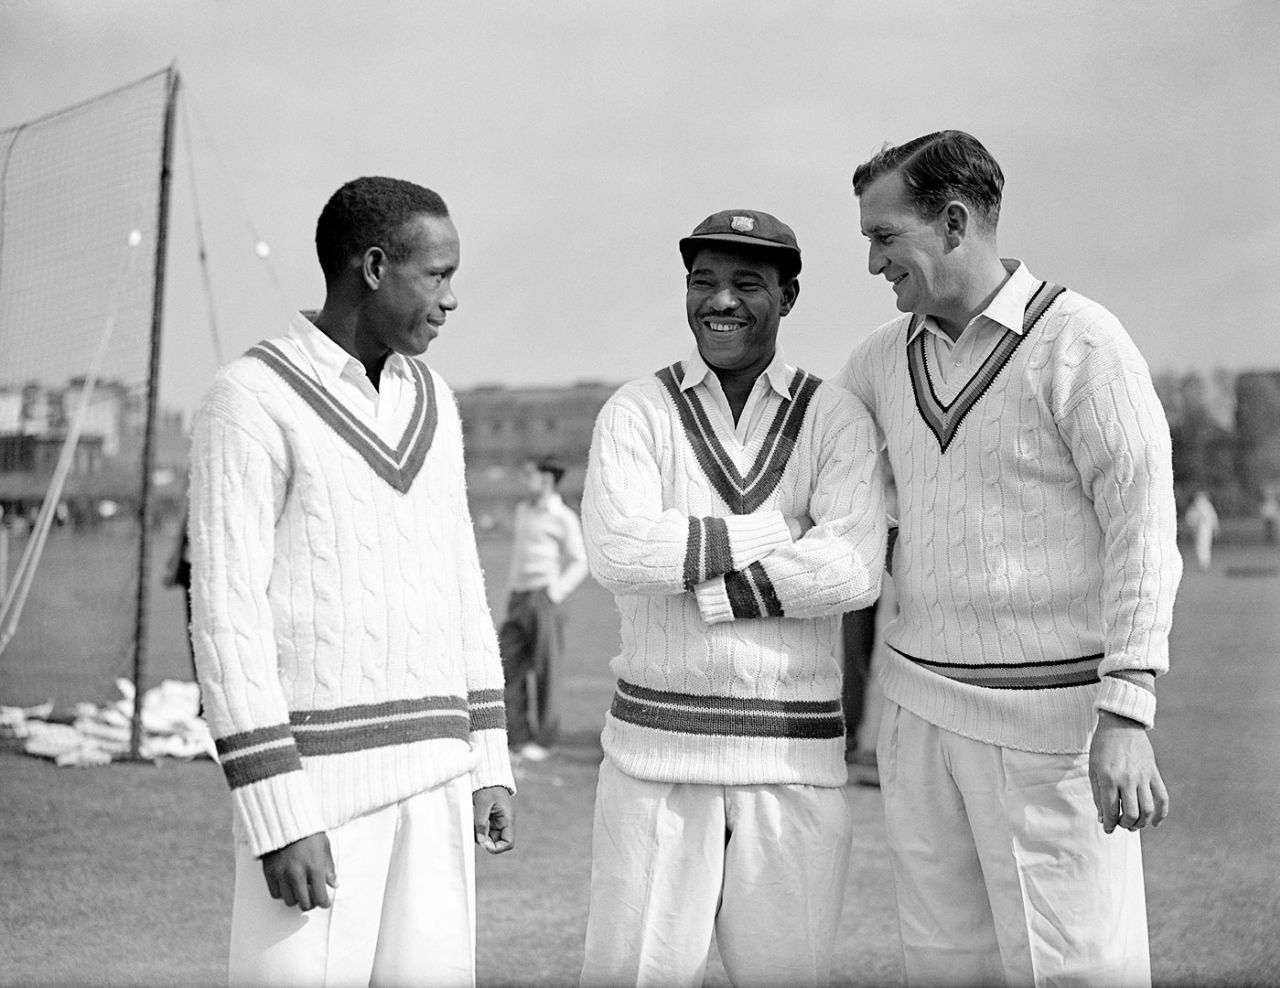 Roy Gilchrist, Everton Weekes and Jim Laker share a laugh, Lord's, April 16, 1957